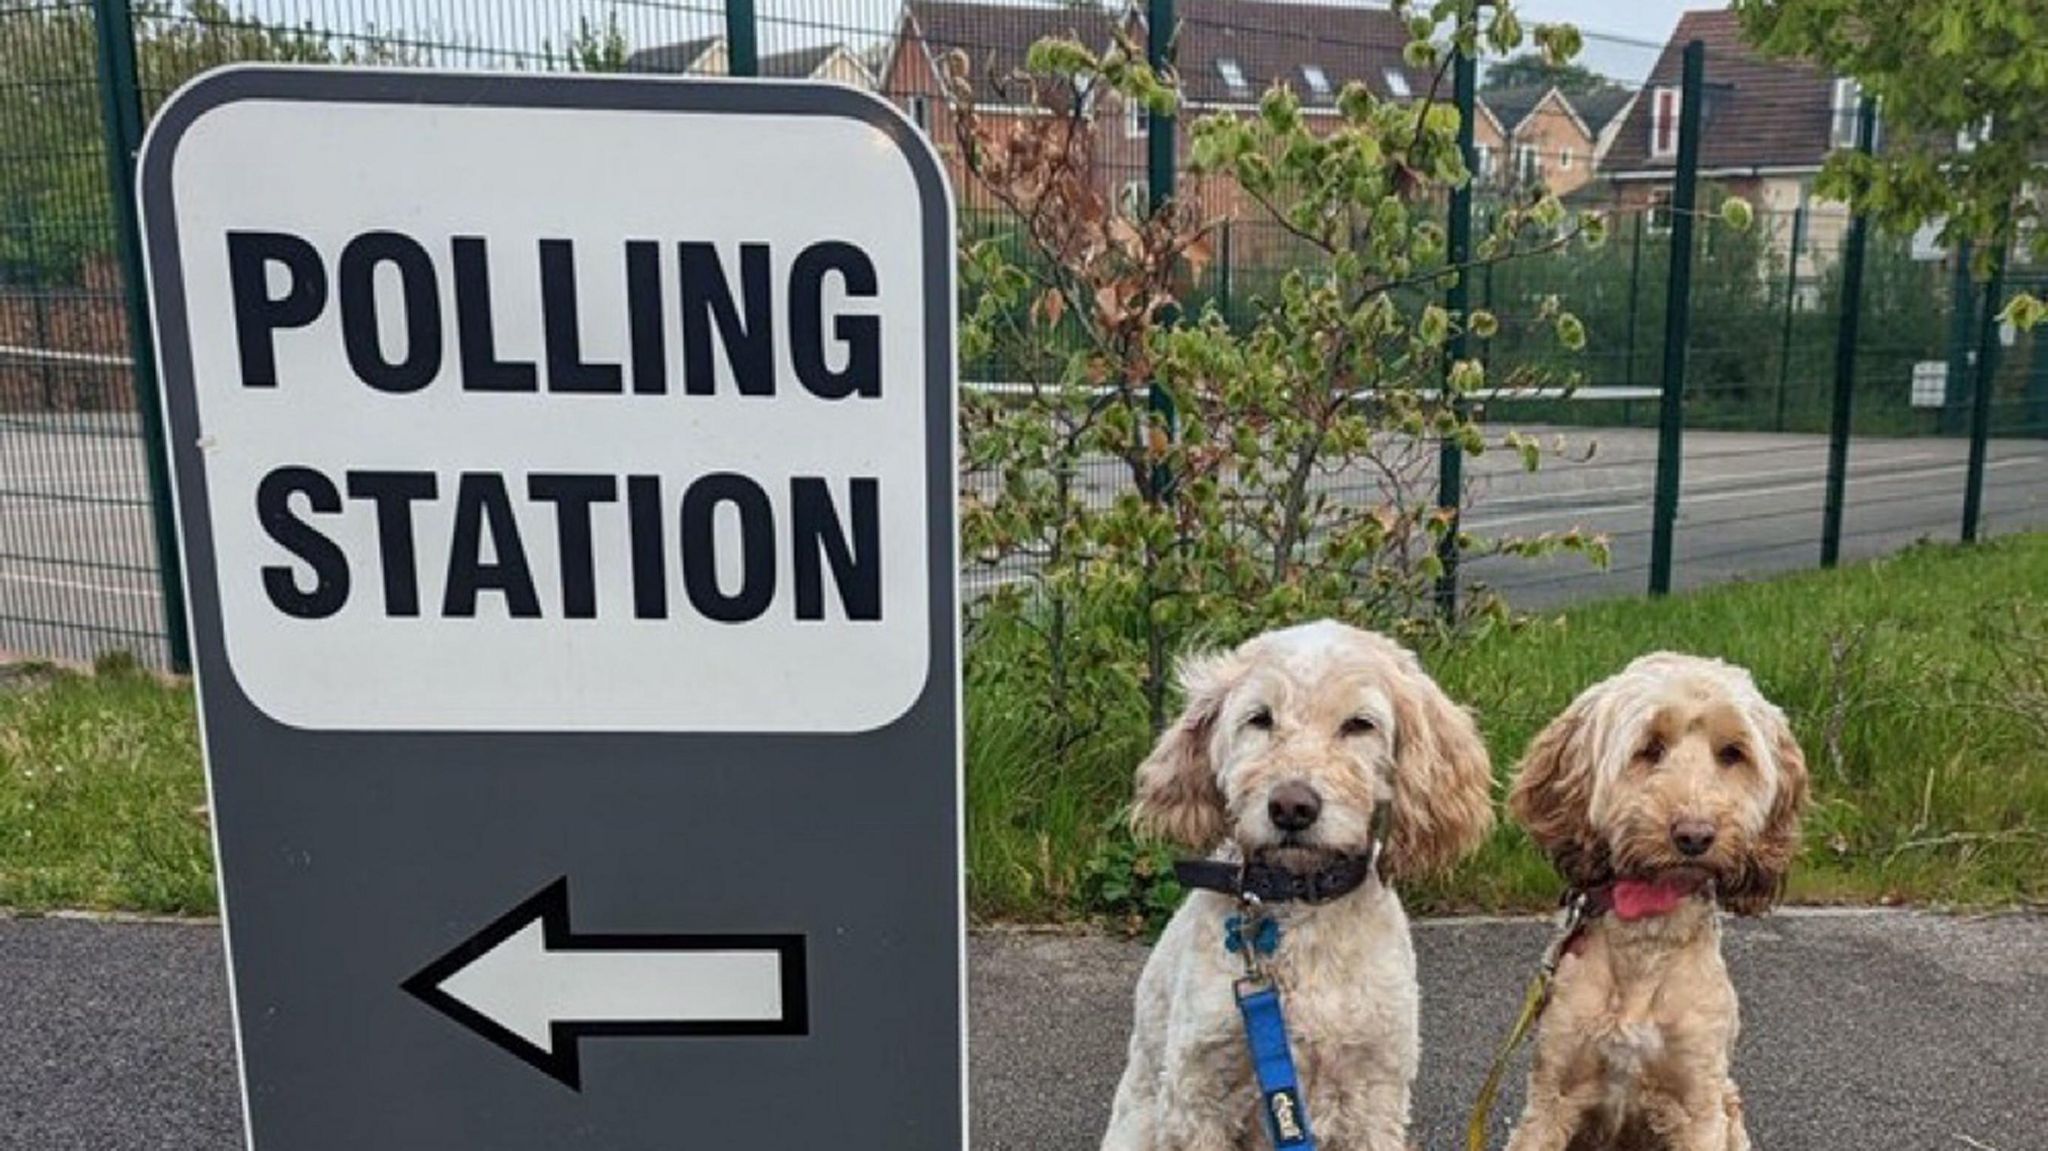 Polling station sign and two dogs